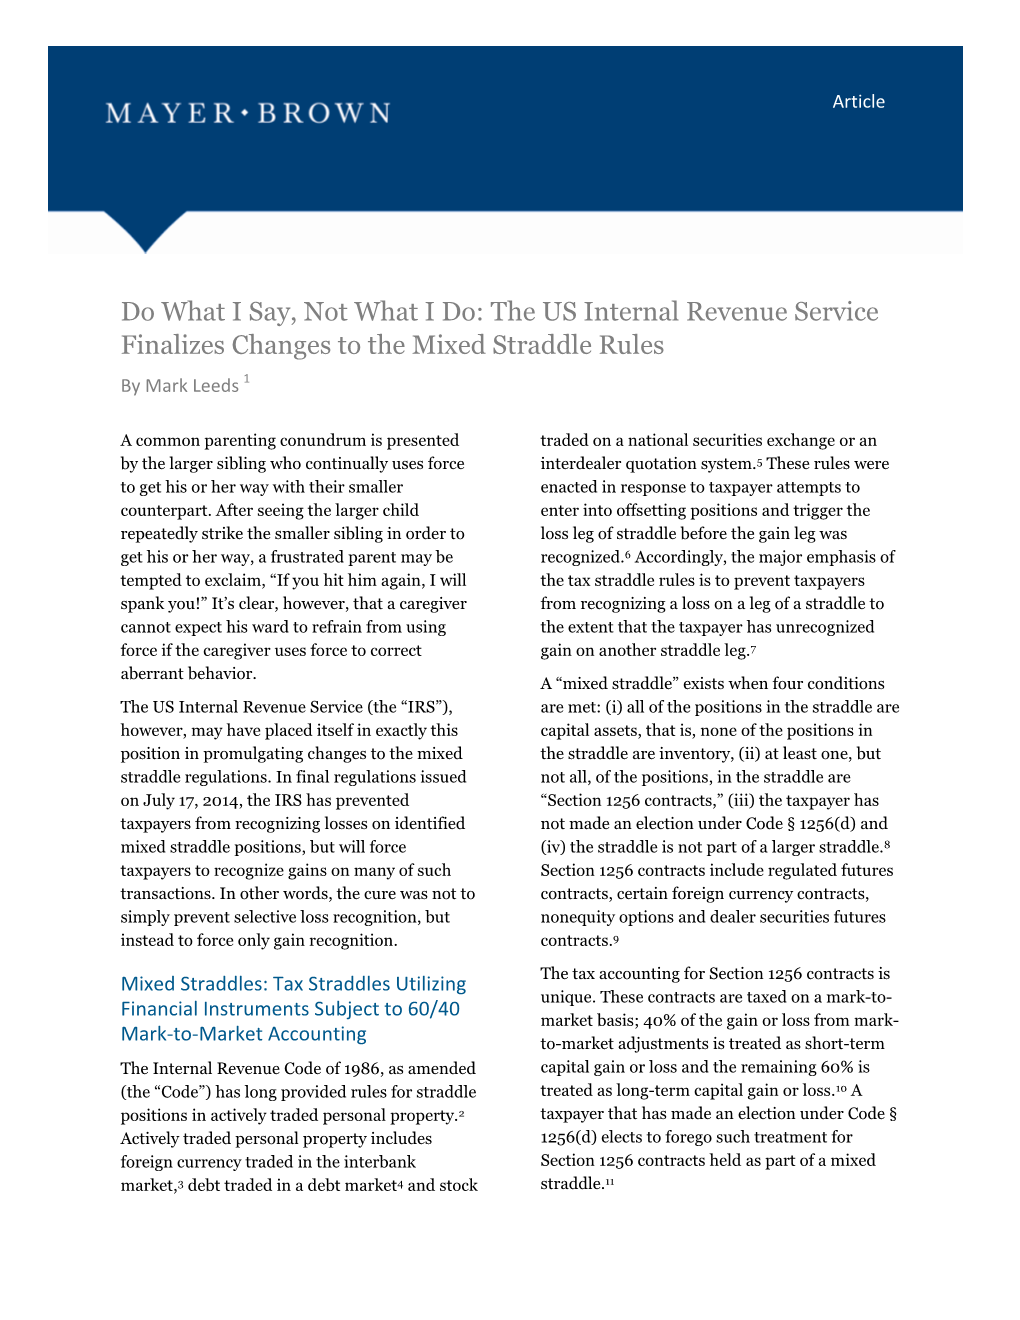 The US Internal Revenue Service Finalizes Changes to the Mixed Straddle Rules by Mark Leeds 1